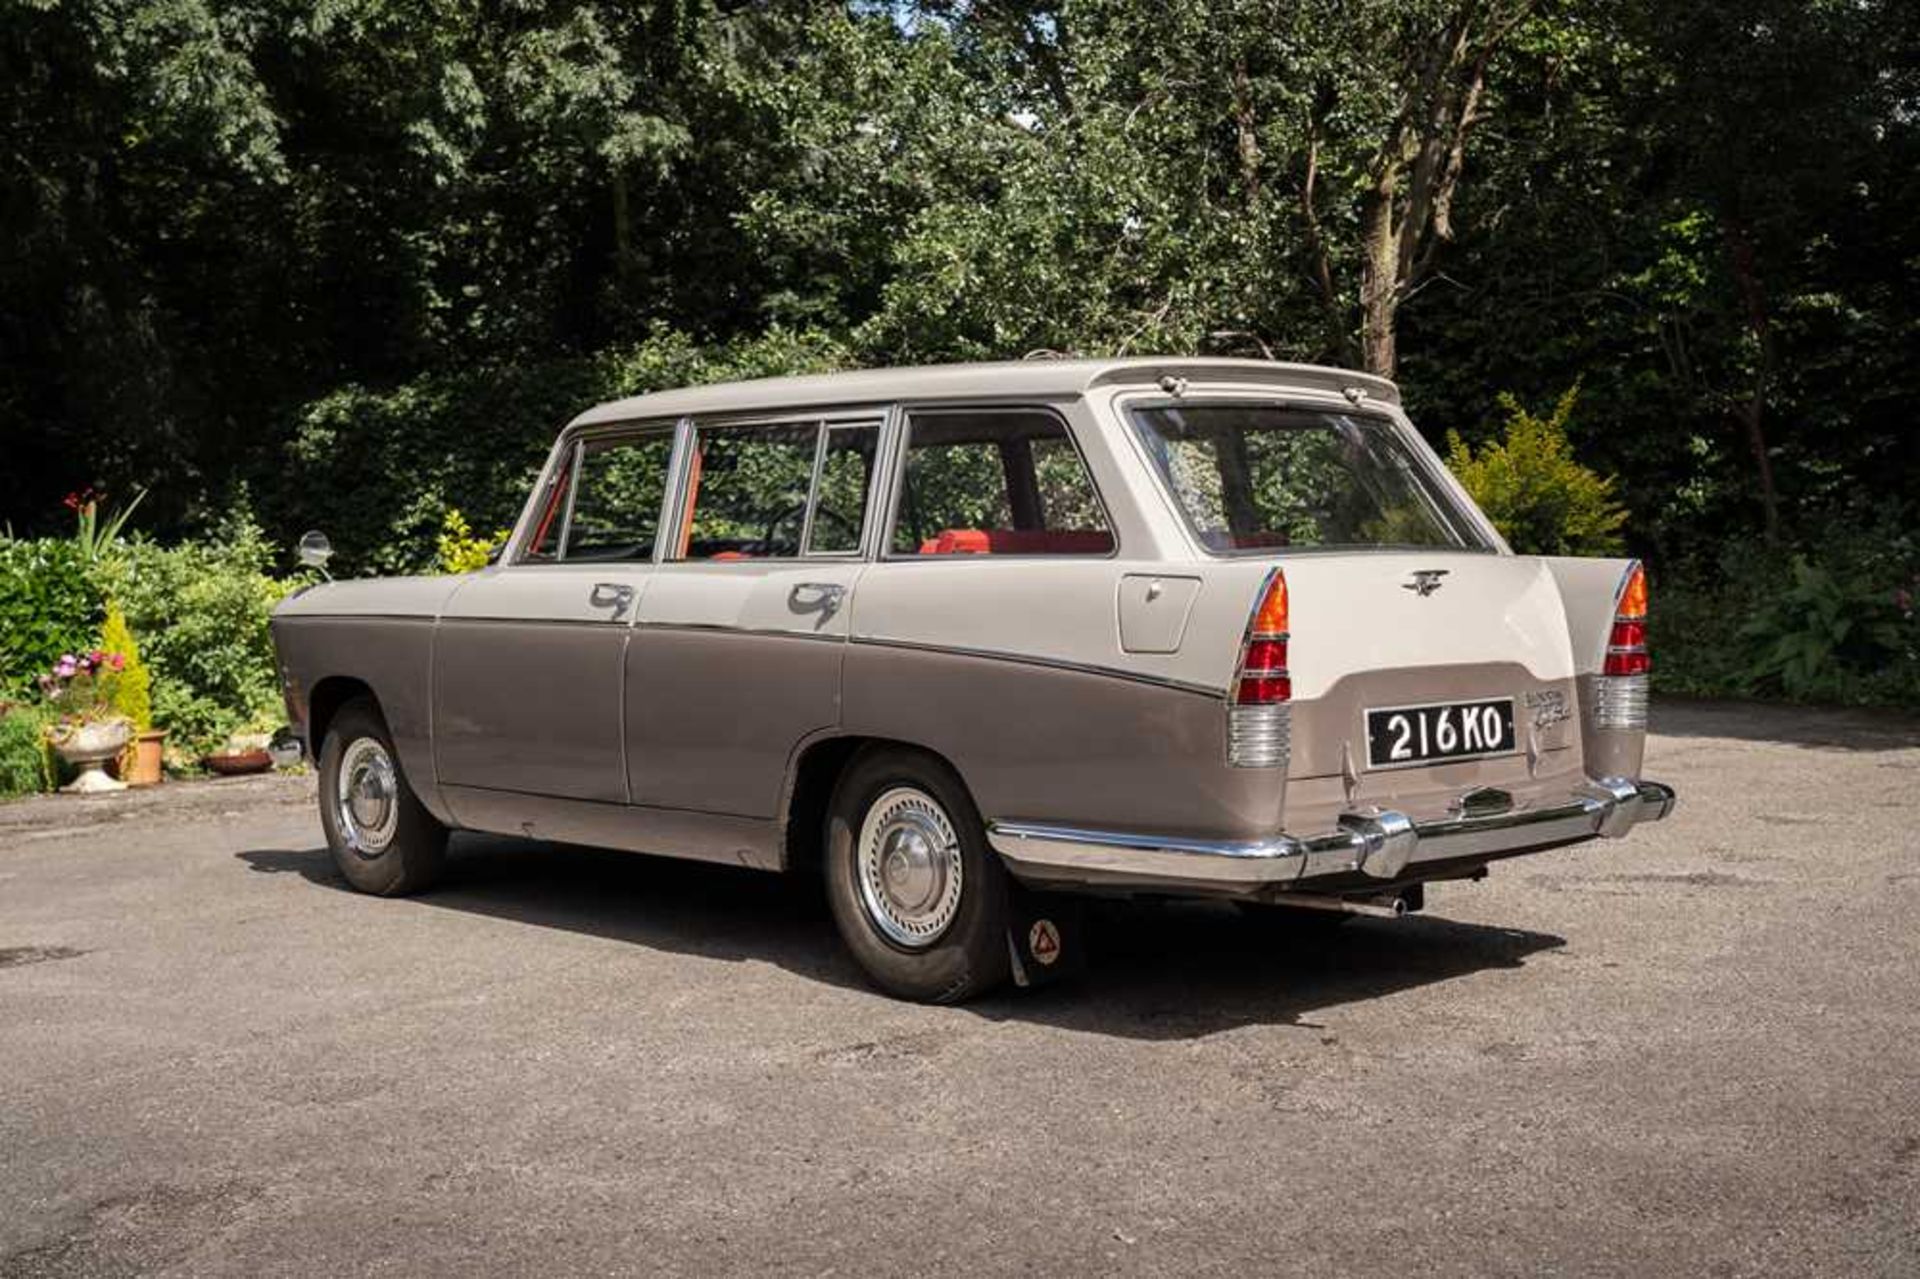 1964 Morris Oxford Series VI Farina Traveller Just 7,000 miles from new - Image 13 of 98